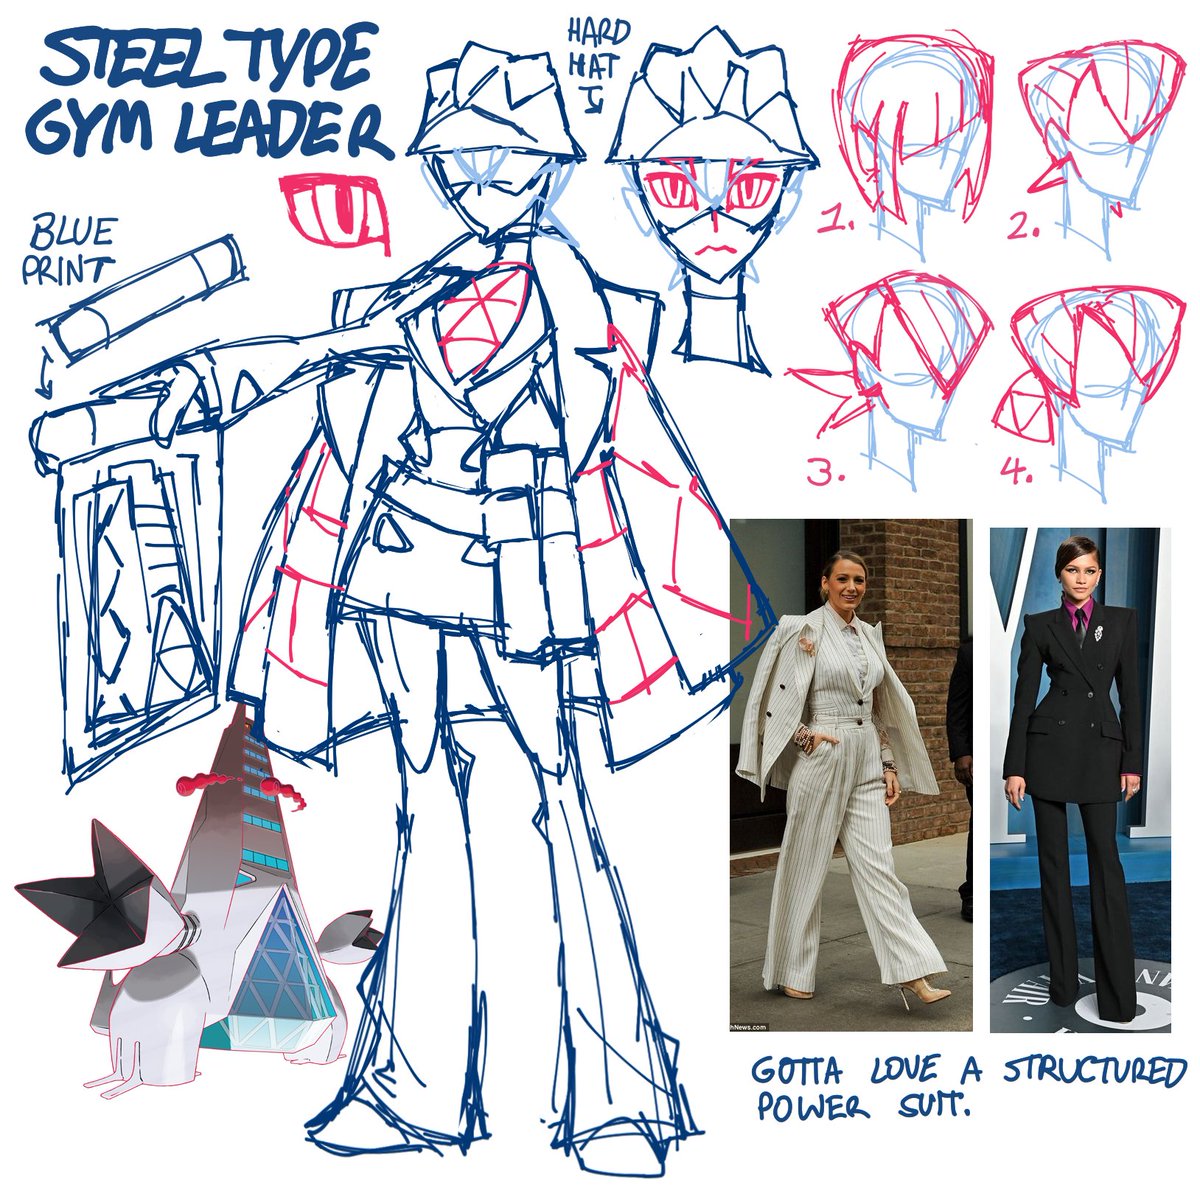 was thinking about designing some pokemon gym leaders. here's a sketch for a steel type gym leader who is an architect. idk if i will continue with it though 